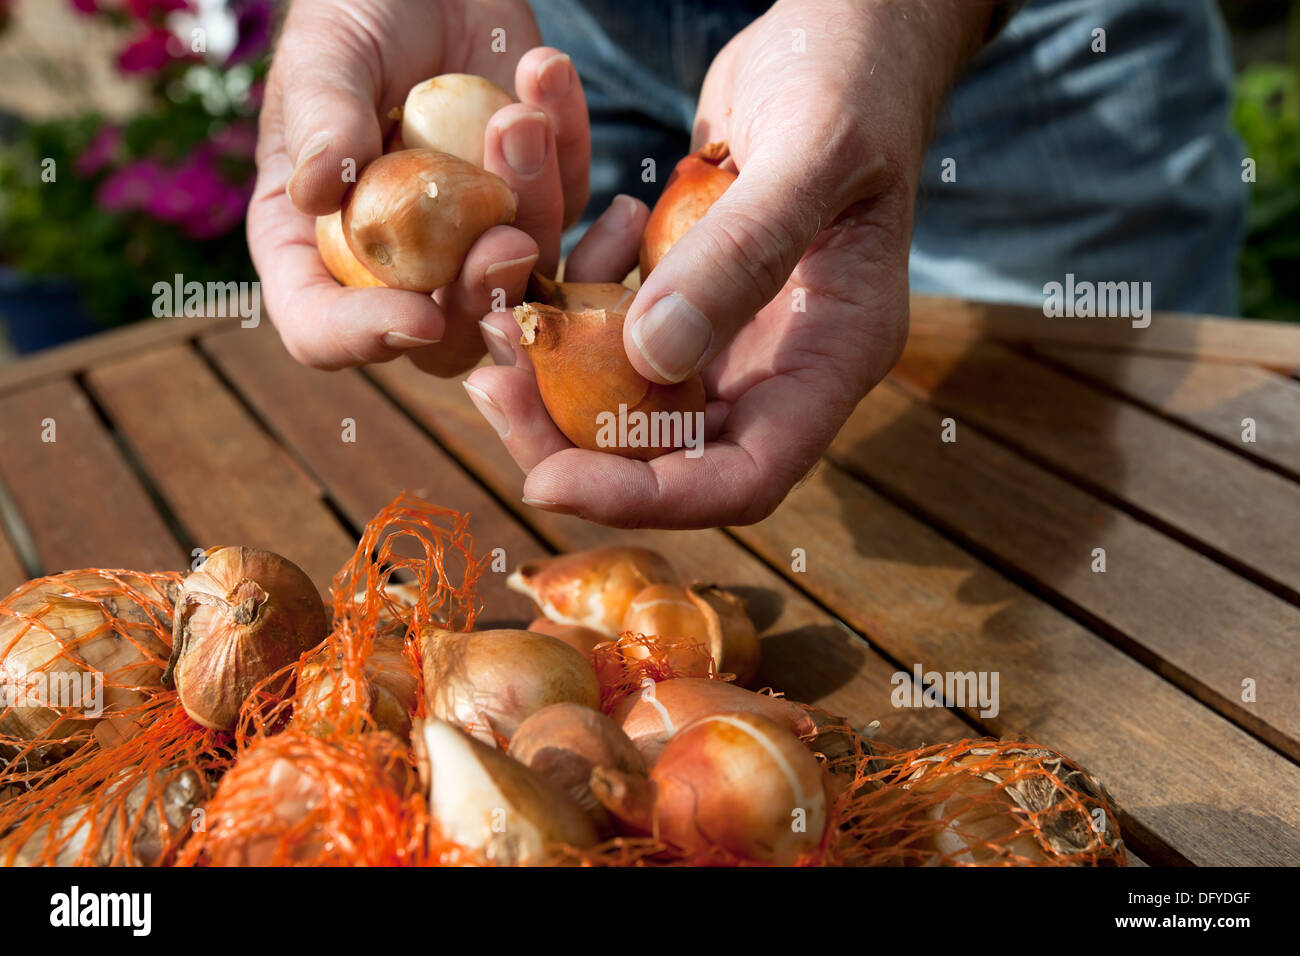 Close up of man person hands holding and sellecting choosing tulip bulbs ready for planting in the garden England UK United Kingdom GB Great Britain Stock Photo